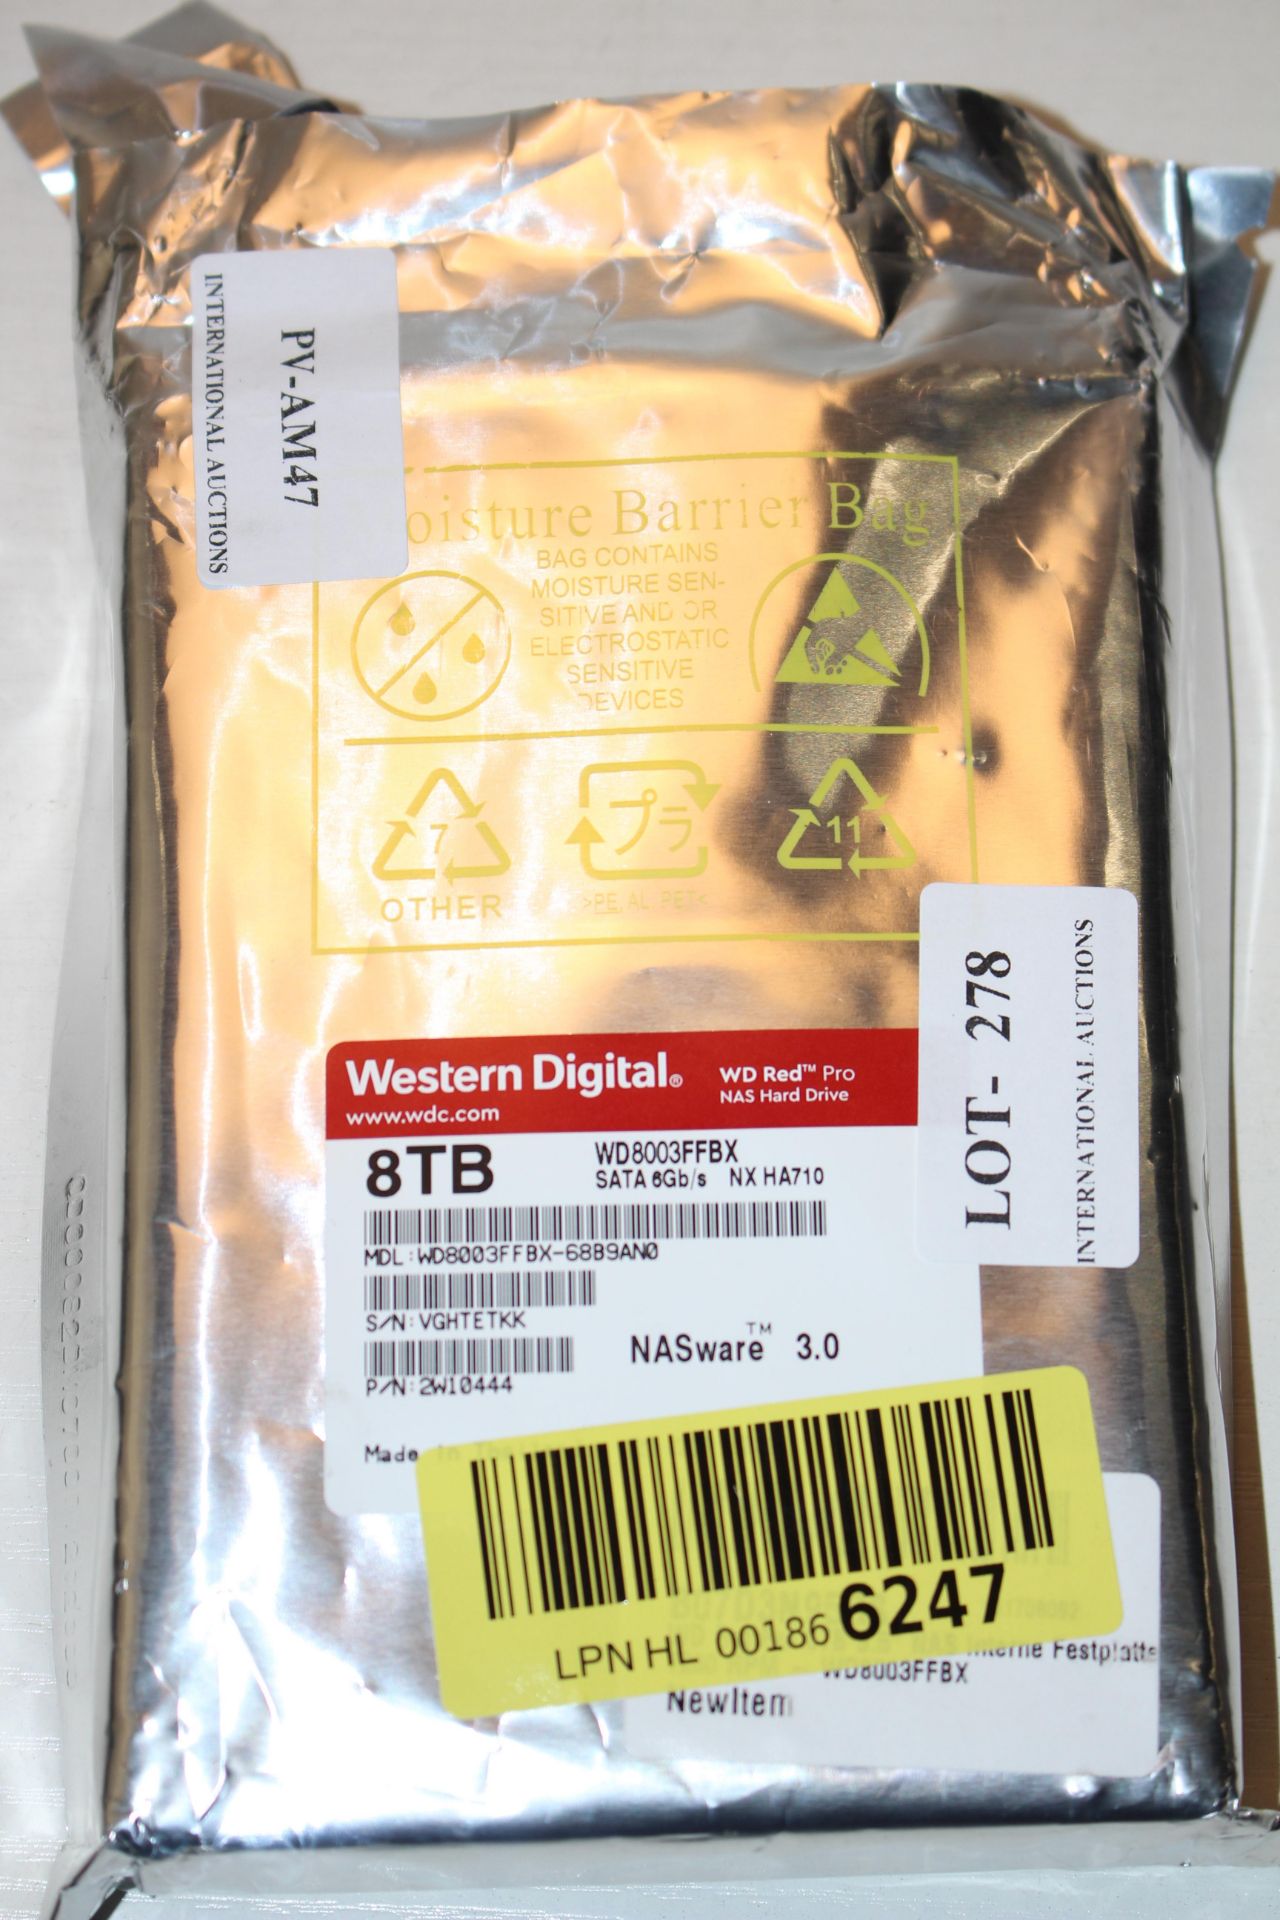 UNBOXED WESTERN DIGITAL 8TB HDDCondition ReportAppraisal Available on Request- All Items are